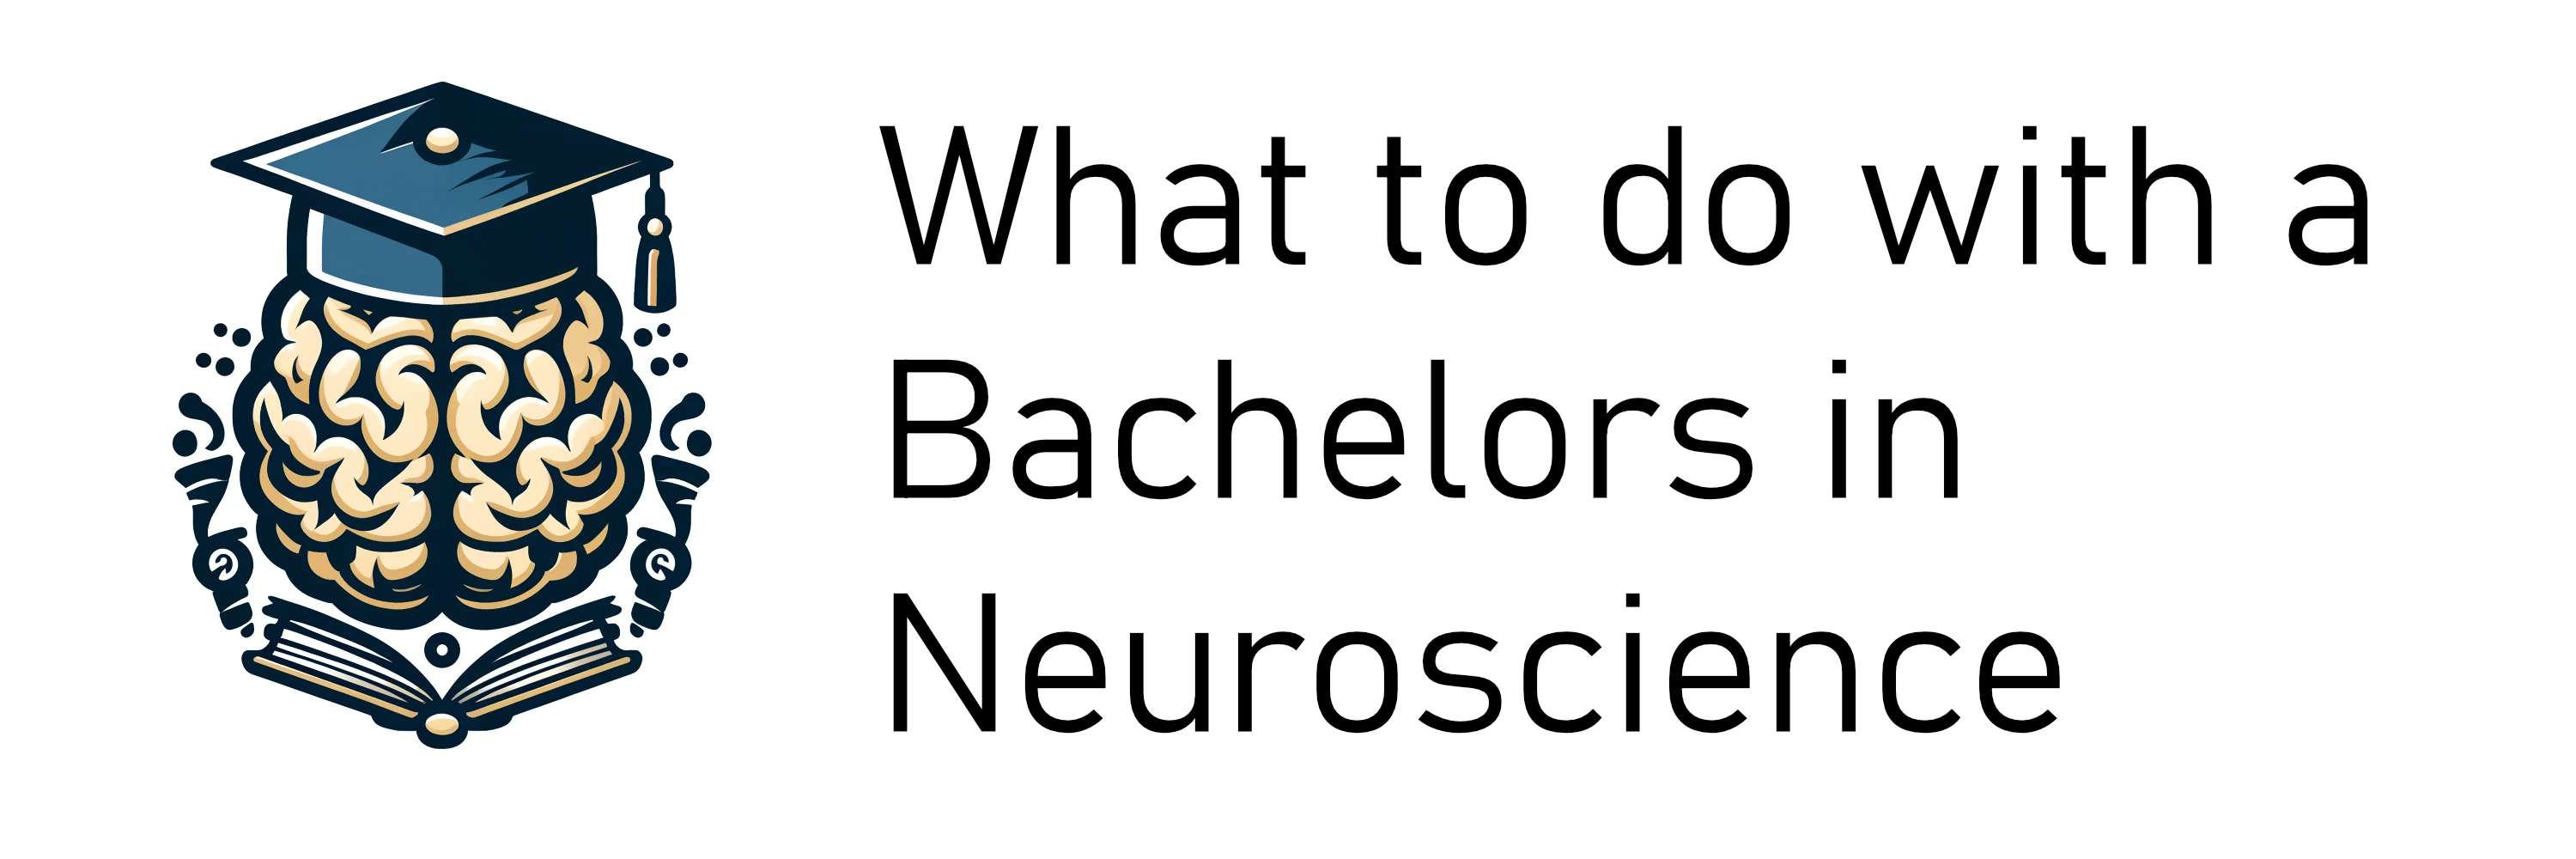 What to do with a Bachelors in Neuroscience - Home